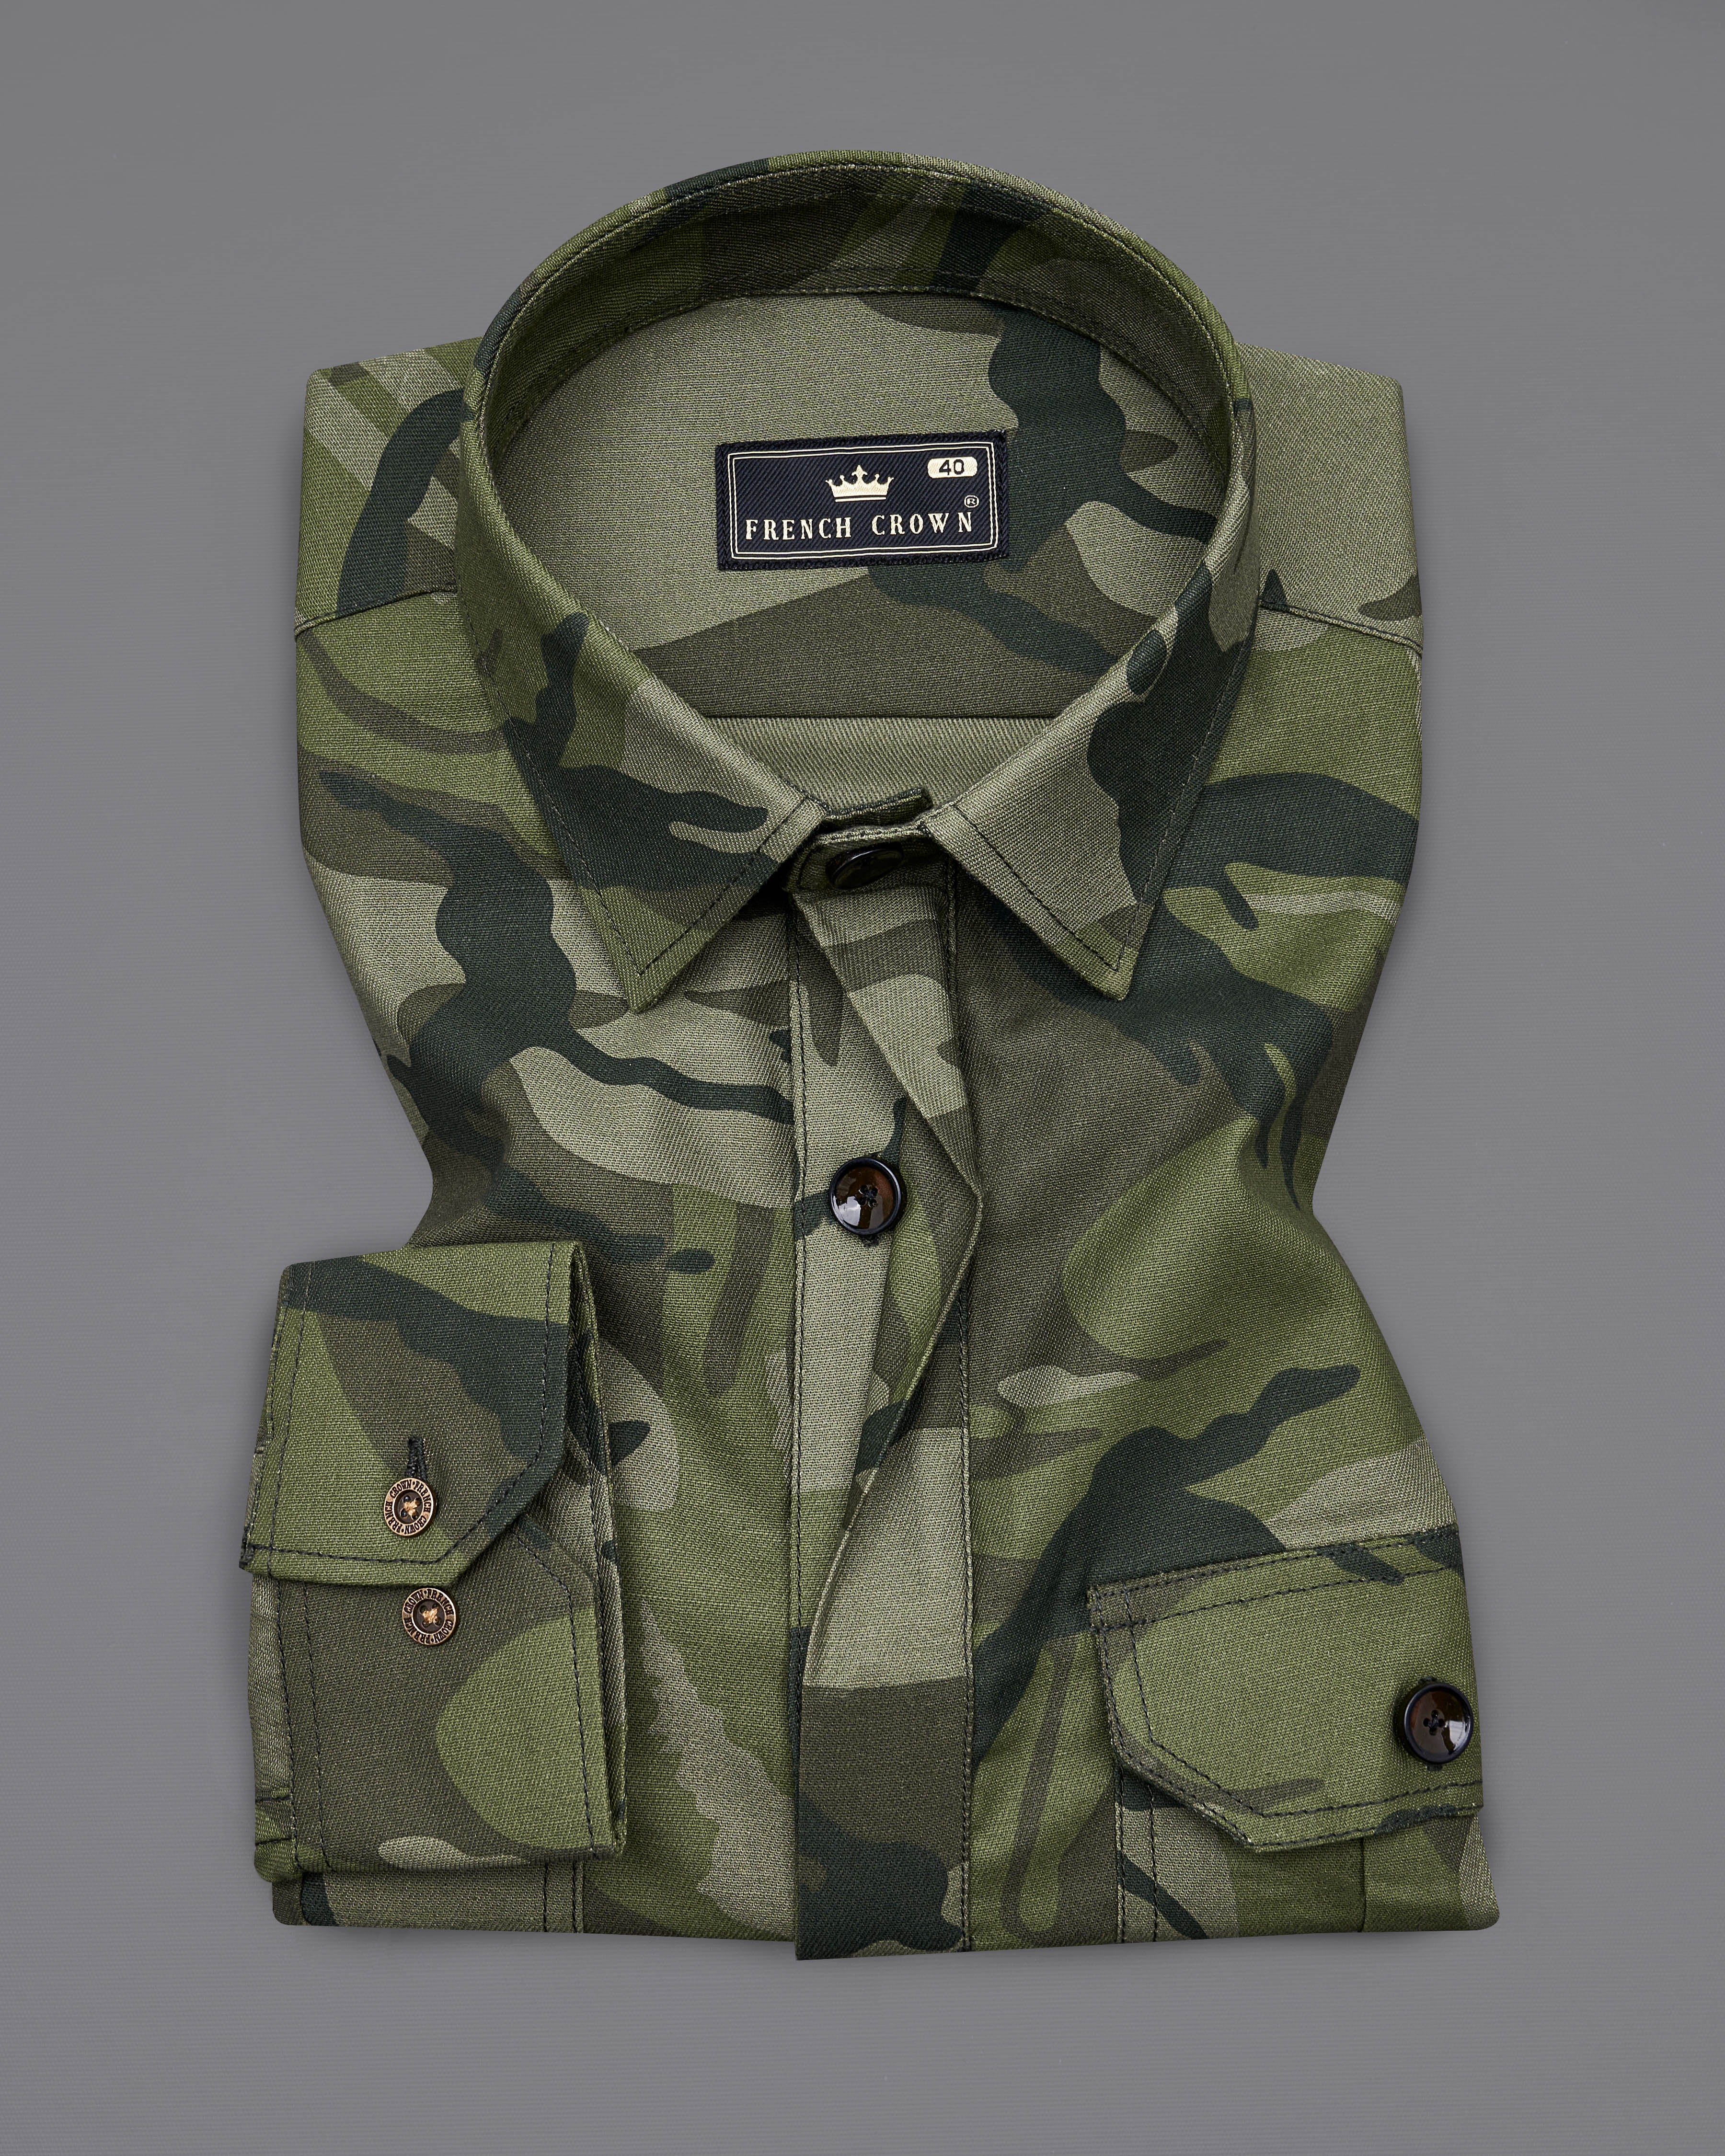 Finch Green with Taupe Brown Camouflage Printed Royal Oxford Designer OverShirt 8931-BLK-P329-38, 8931-BLK-P329-H-38,  8931-BLK-P329-39,  8931-BLK-P329-H-39,  8931-BLK-P329-40,  8931-BLK-P329-H-40,  8931-BLK-P329-42,  8931-BLK-P329-H-42,  8931-BLK-P329-44,  8931-BLK-P329-H-44,  8931-BLK-P329-46,  8931-BLK-P329-H-46,  8931-BLK-P329-48,  8931-BLK-P329-H-48,  8931-BLK-P329-50,  8931-BLK-P329-H-50,  8931-BLK-P329-52,  8931-BLK-P329-H-52